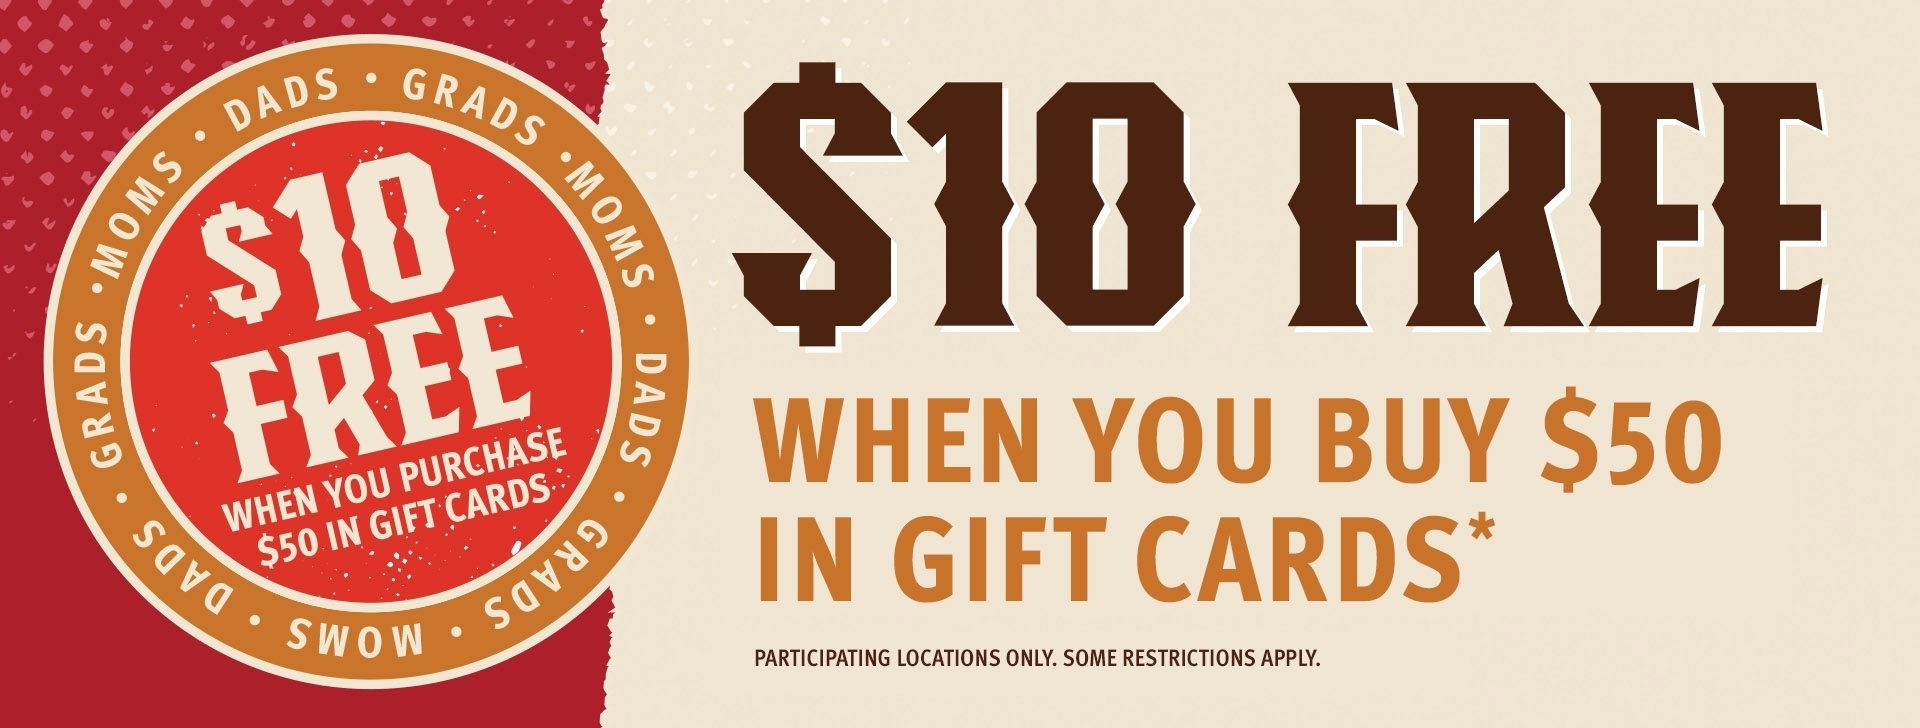 Pizza Ranch Father's Day Buy $50 Gift Cards, Get a Free $10 Bonus Coupon